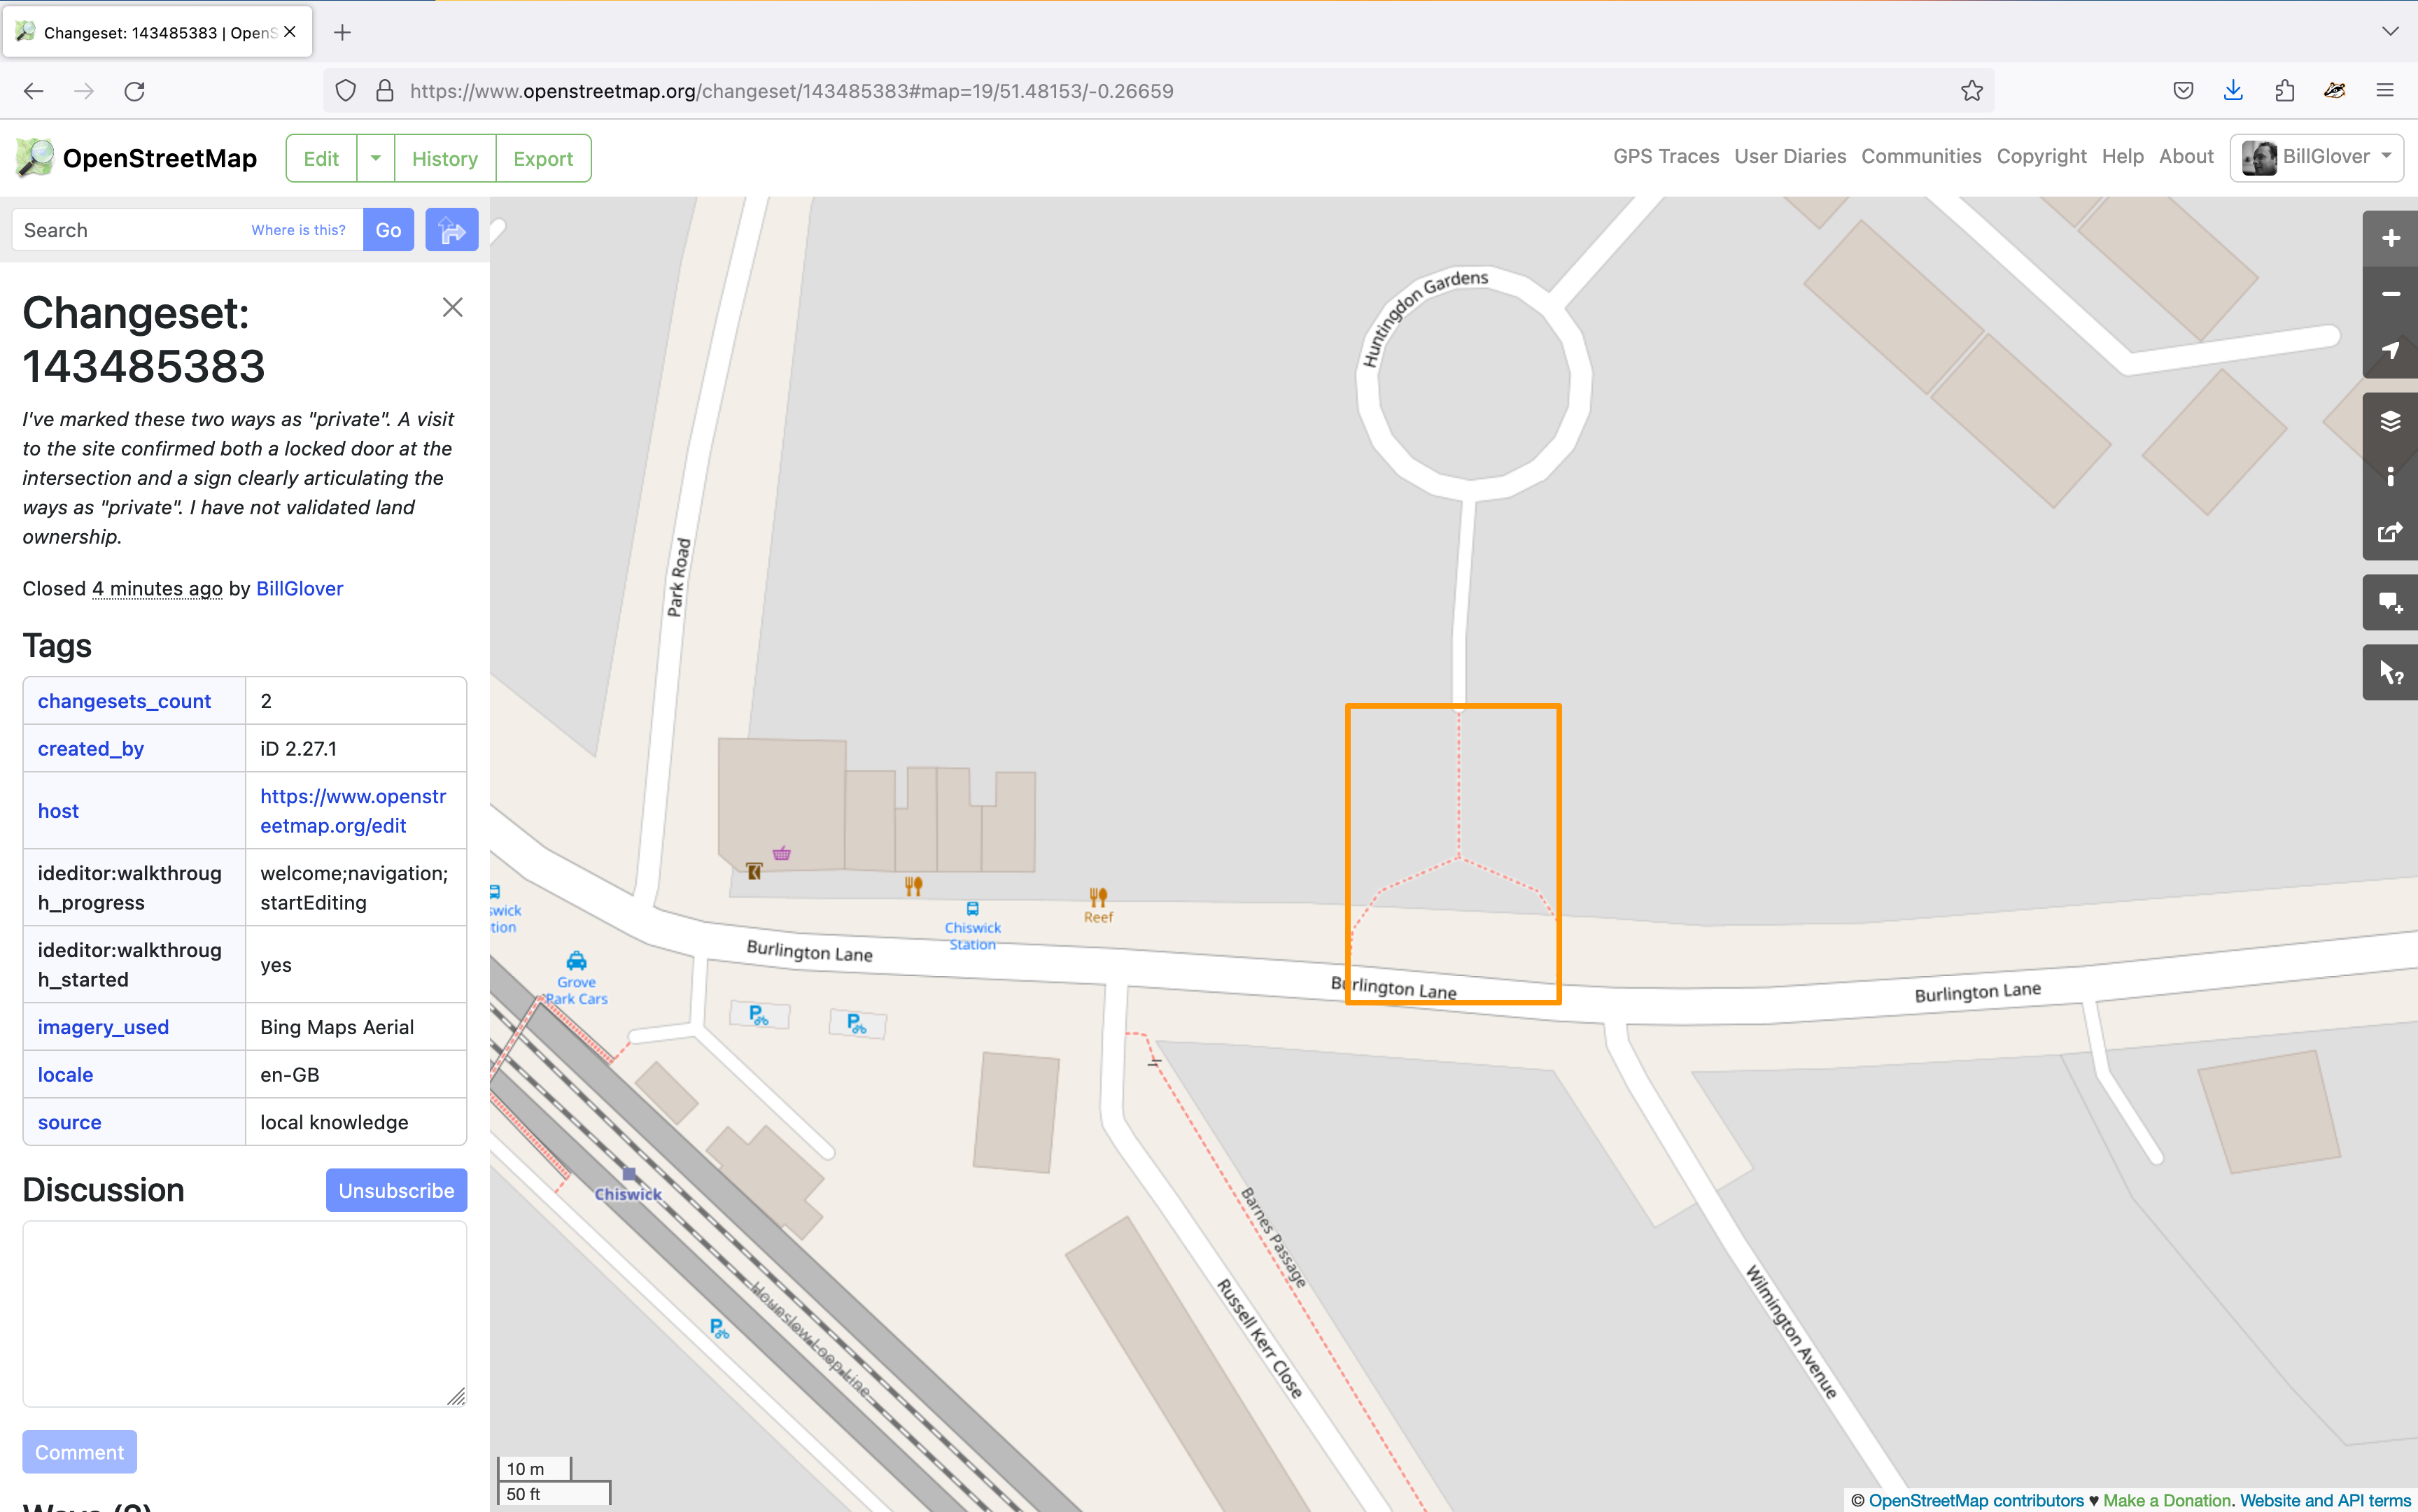 Screenshot of the OpenStreetMap editor showing that my changes were successfully submitted.